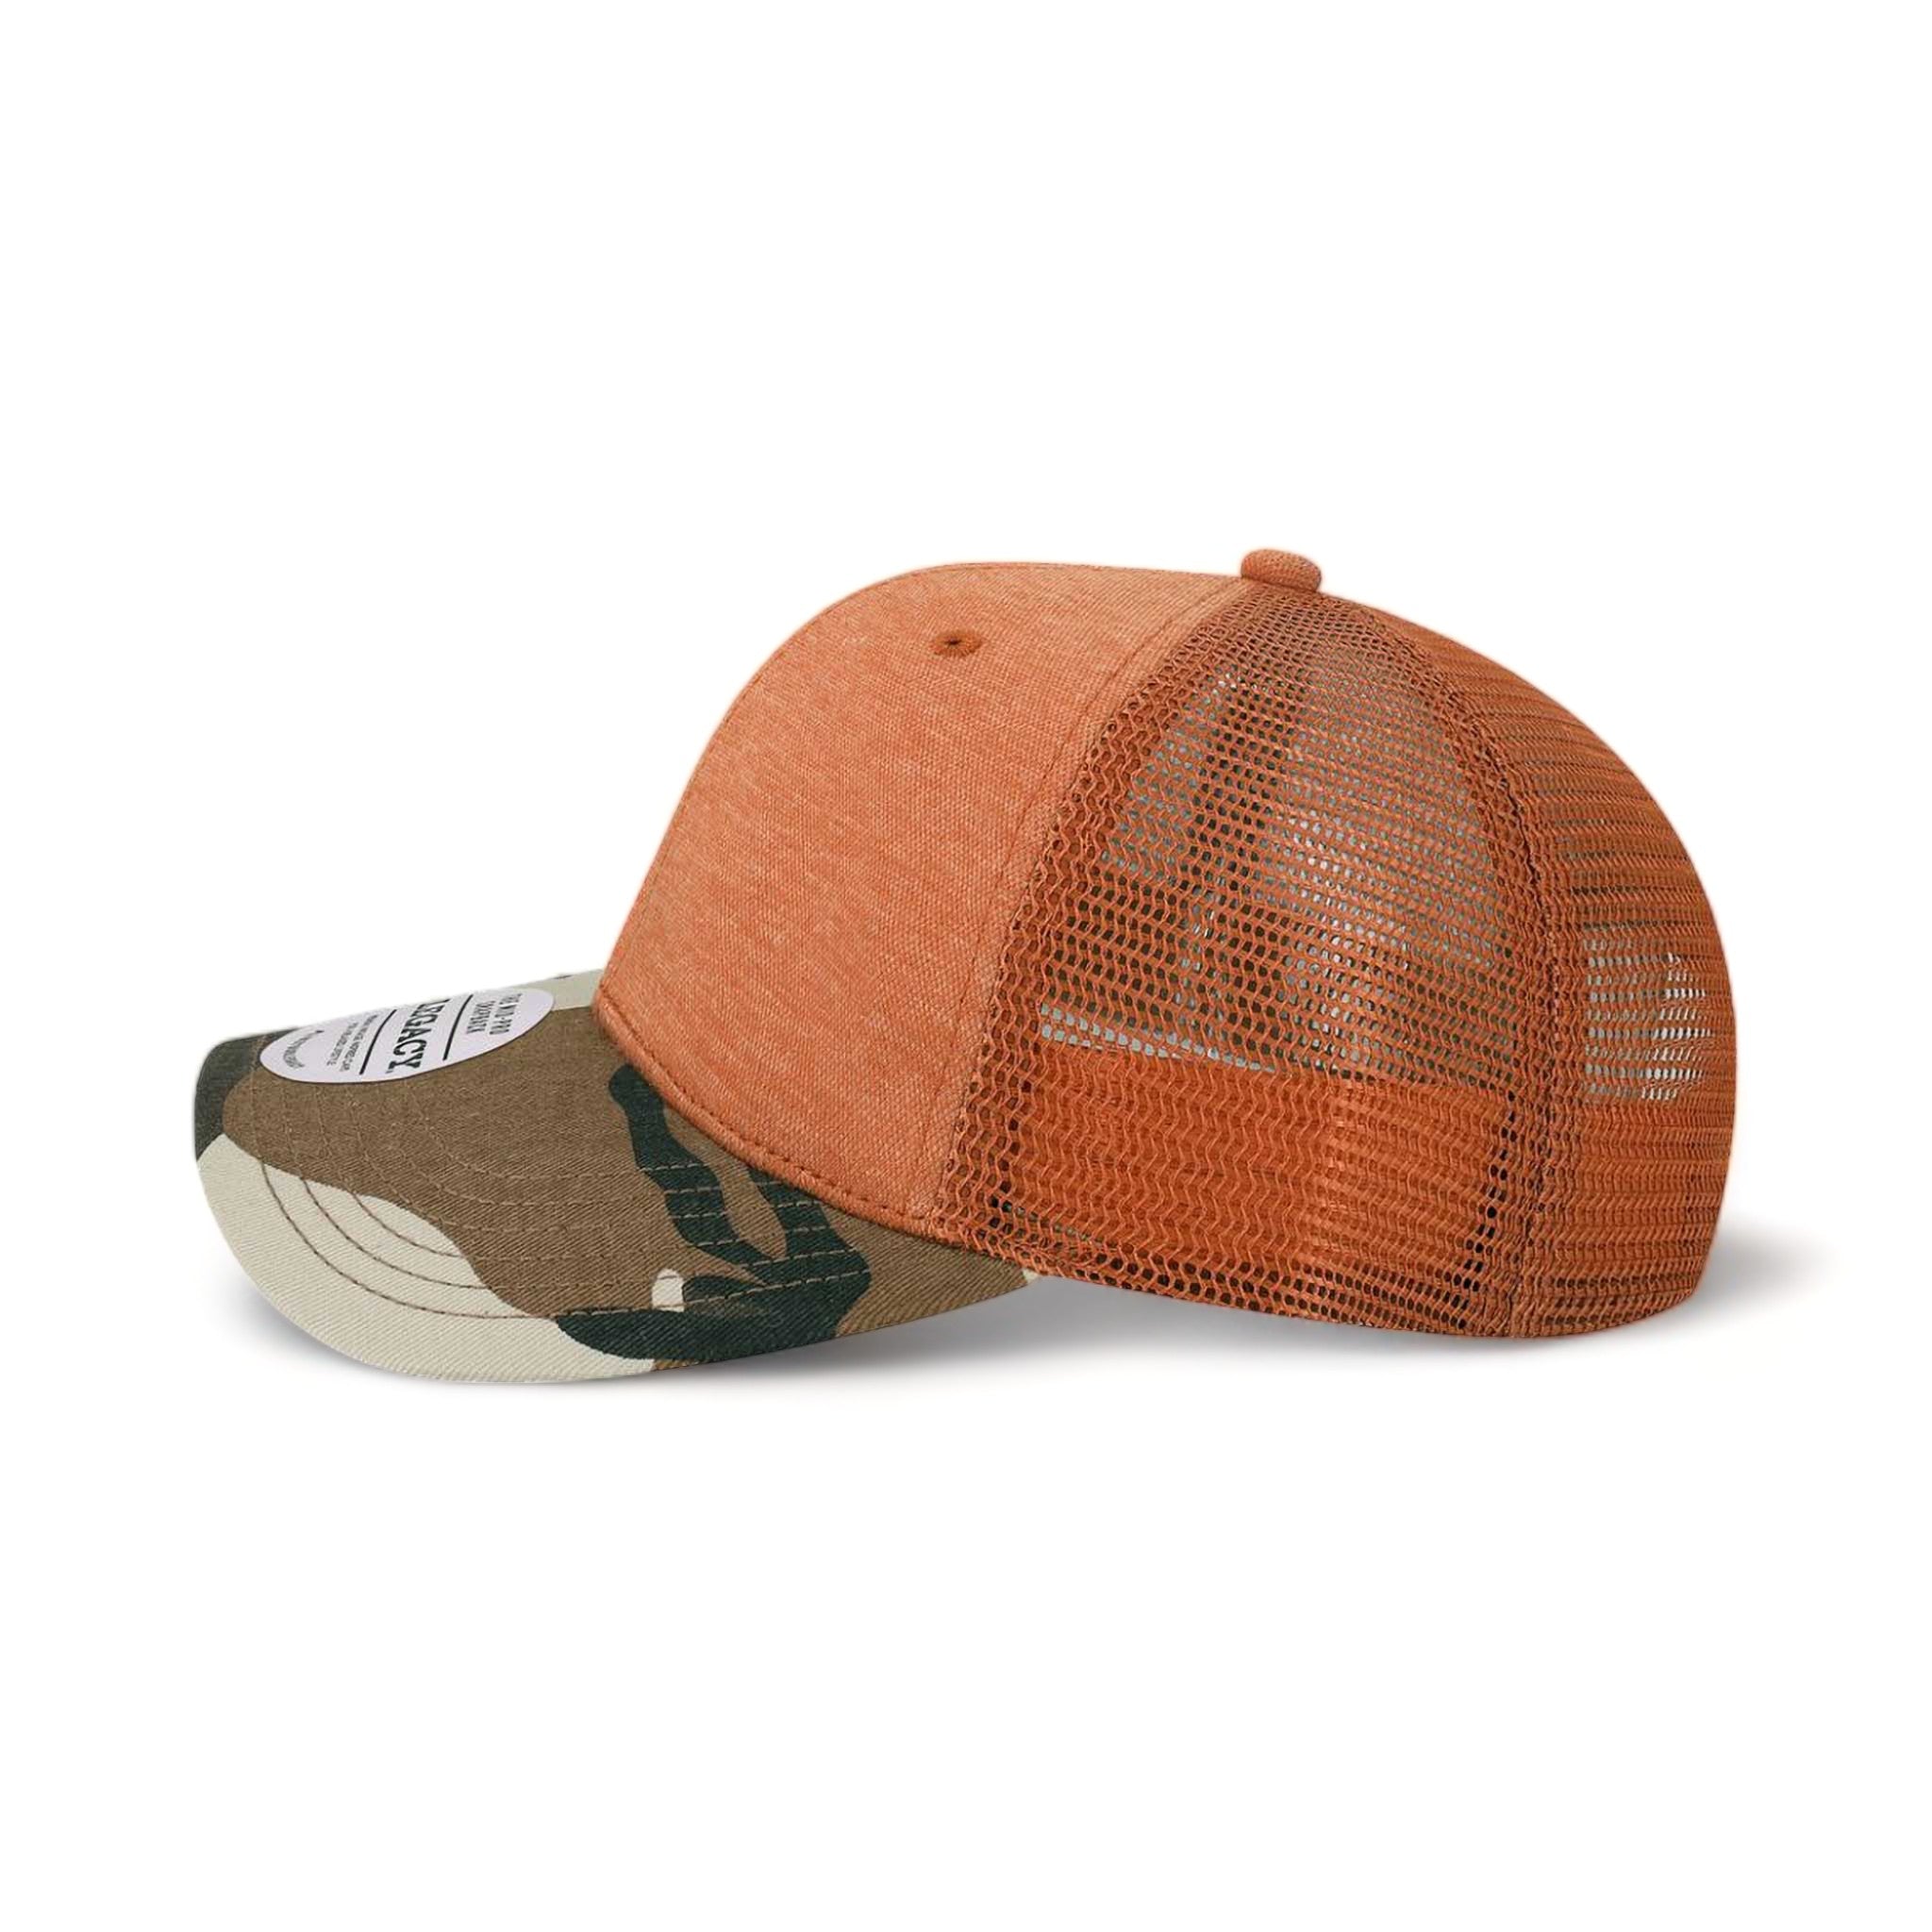 Side view of LEGACY MPS custom hat in saffron and camo